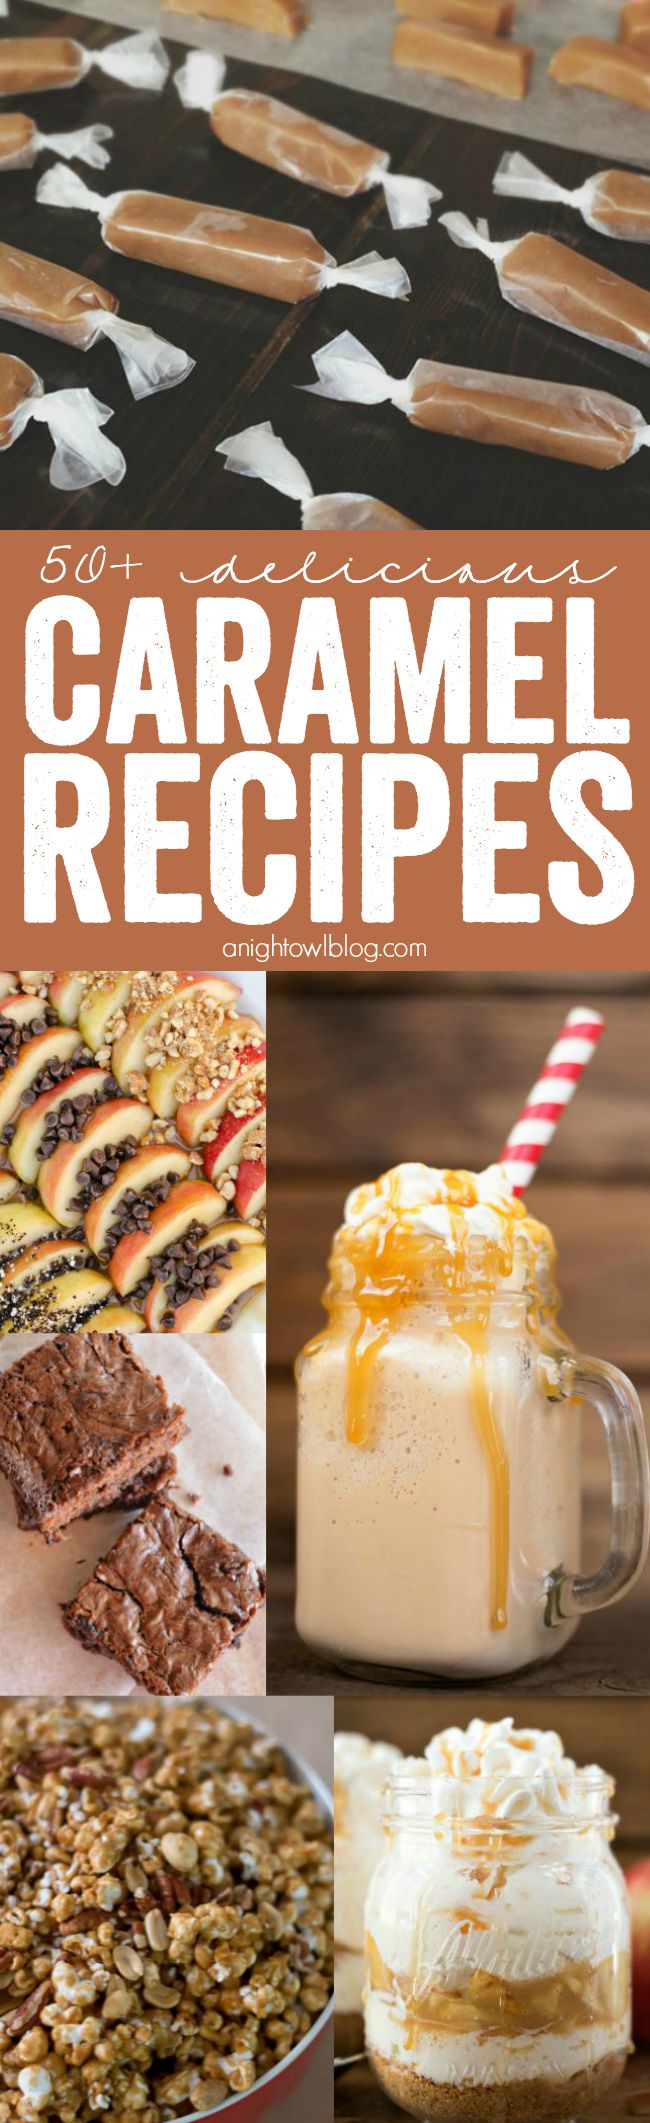 From Caramel Apples to Caramel Macchiatos, discover over 50+ Caramel Recipes you must try! #CaramelRecipes #CaramelApple #CaramelMacchiato